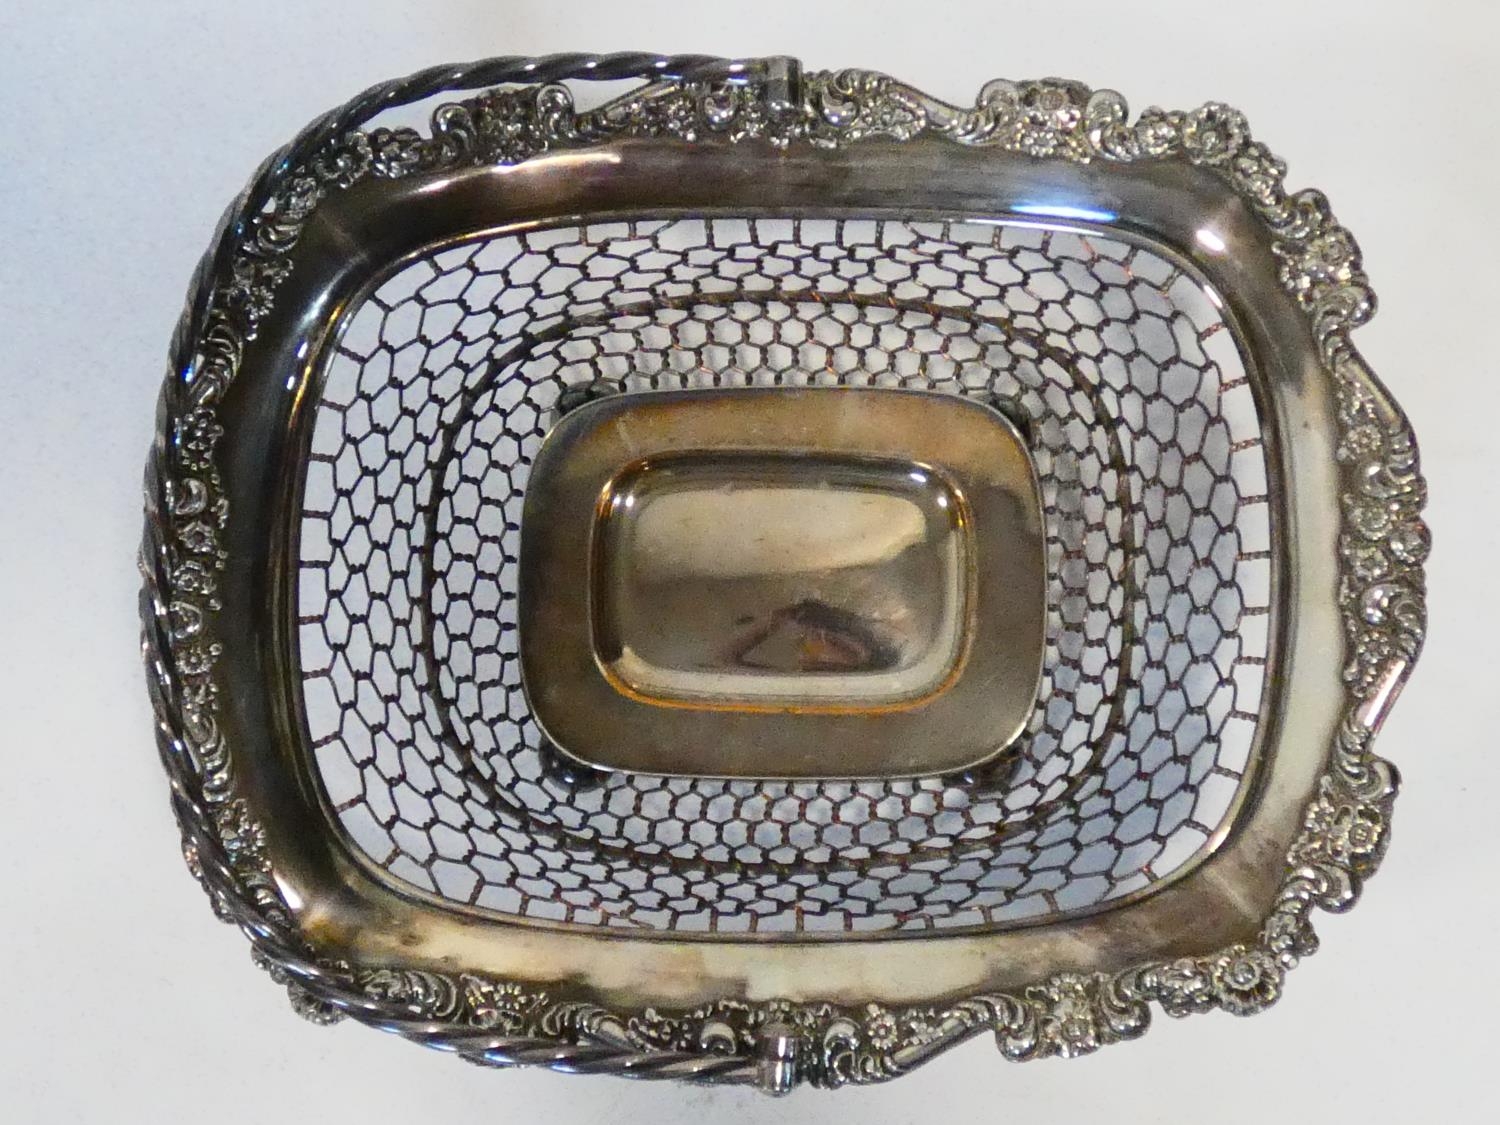 A 19th century silver plated pierced swing handled bread basket along with a silver plated dish - Image 3 of 6